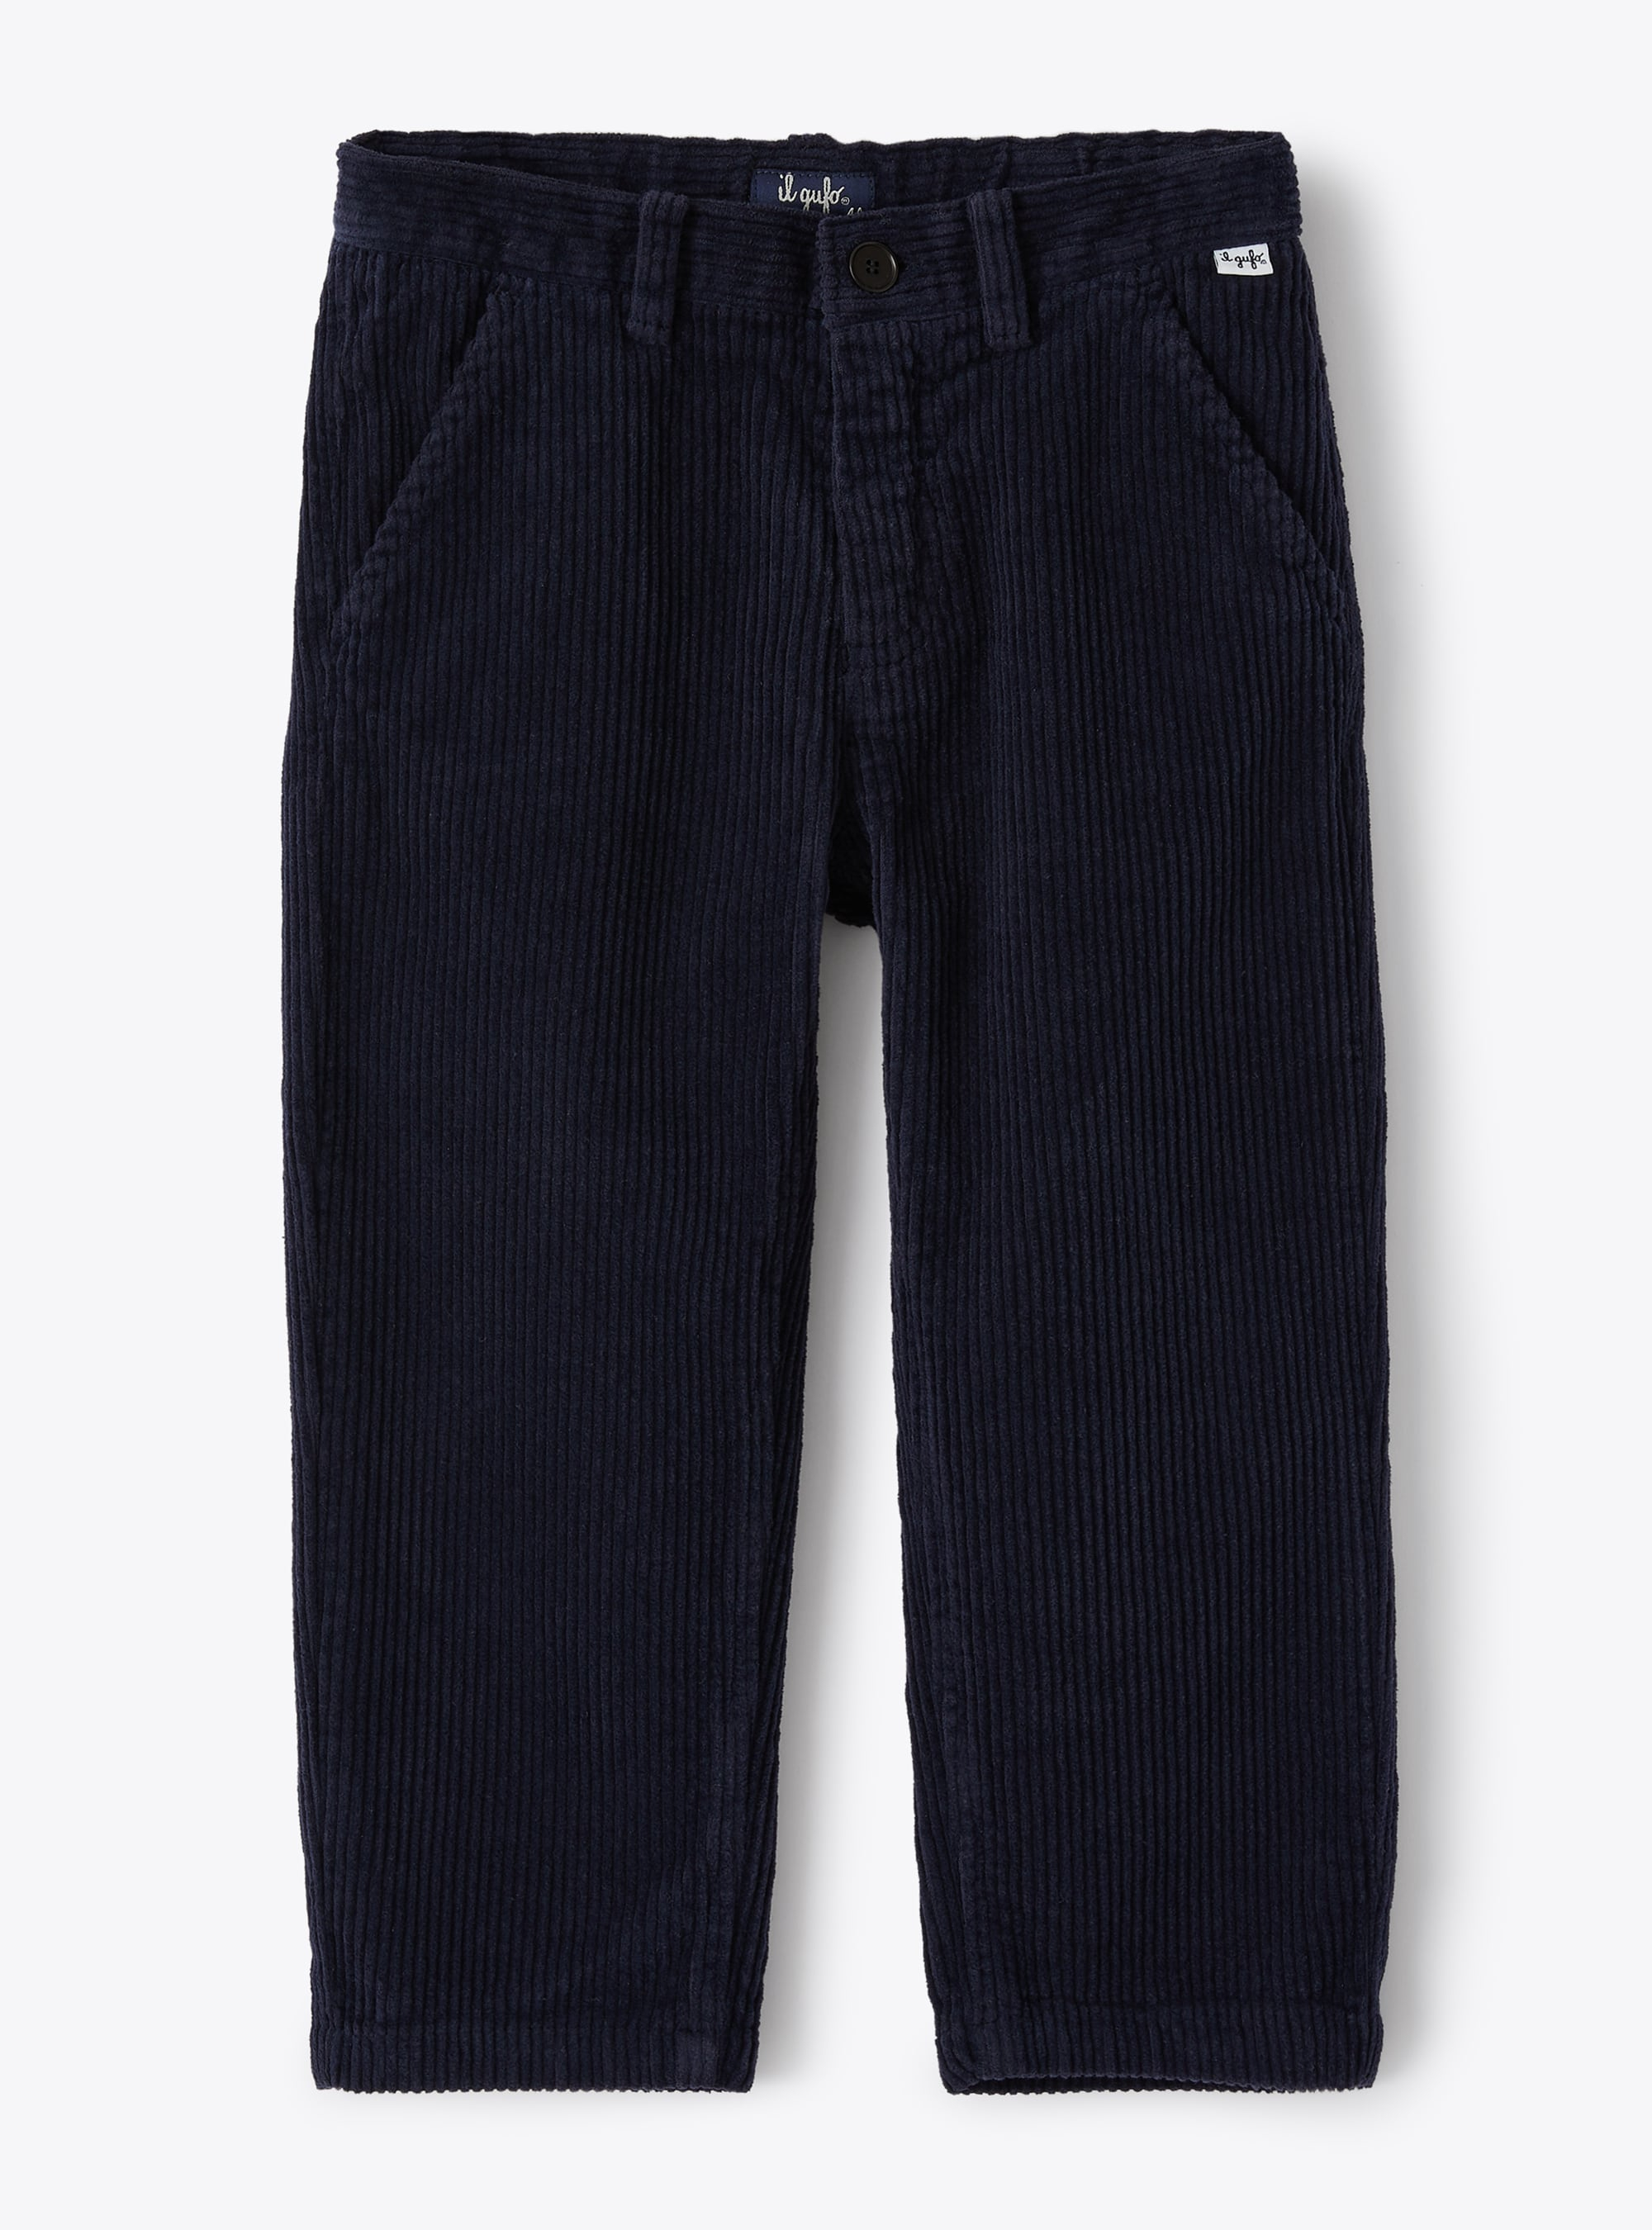 Navy corduroy trousers - Trousers - Il Gufo